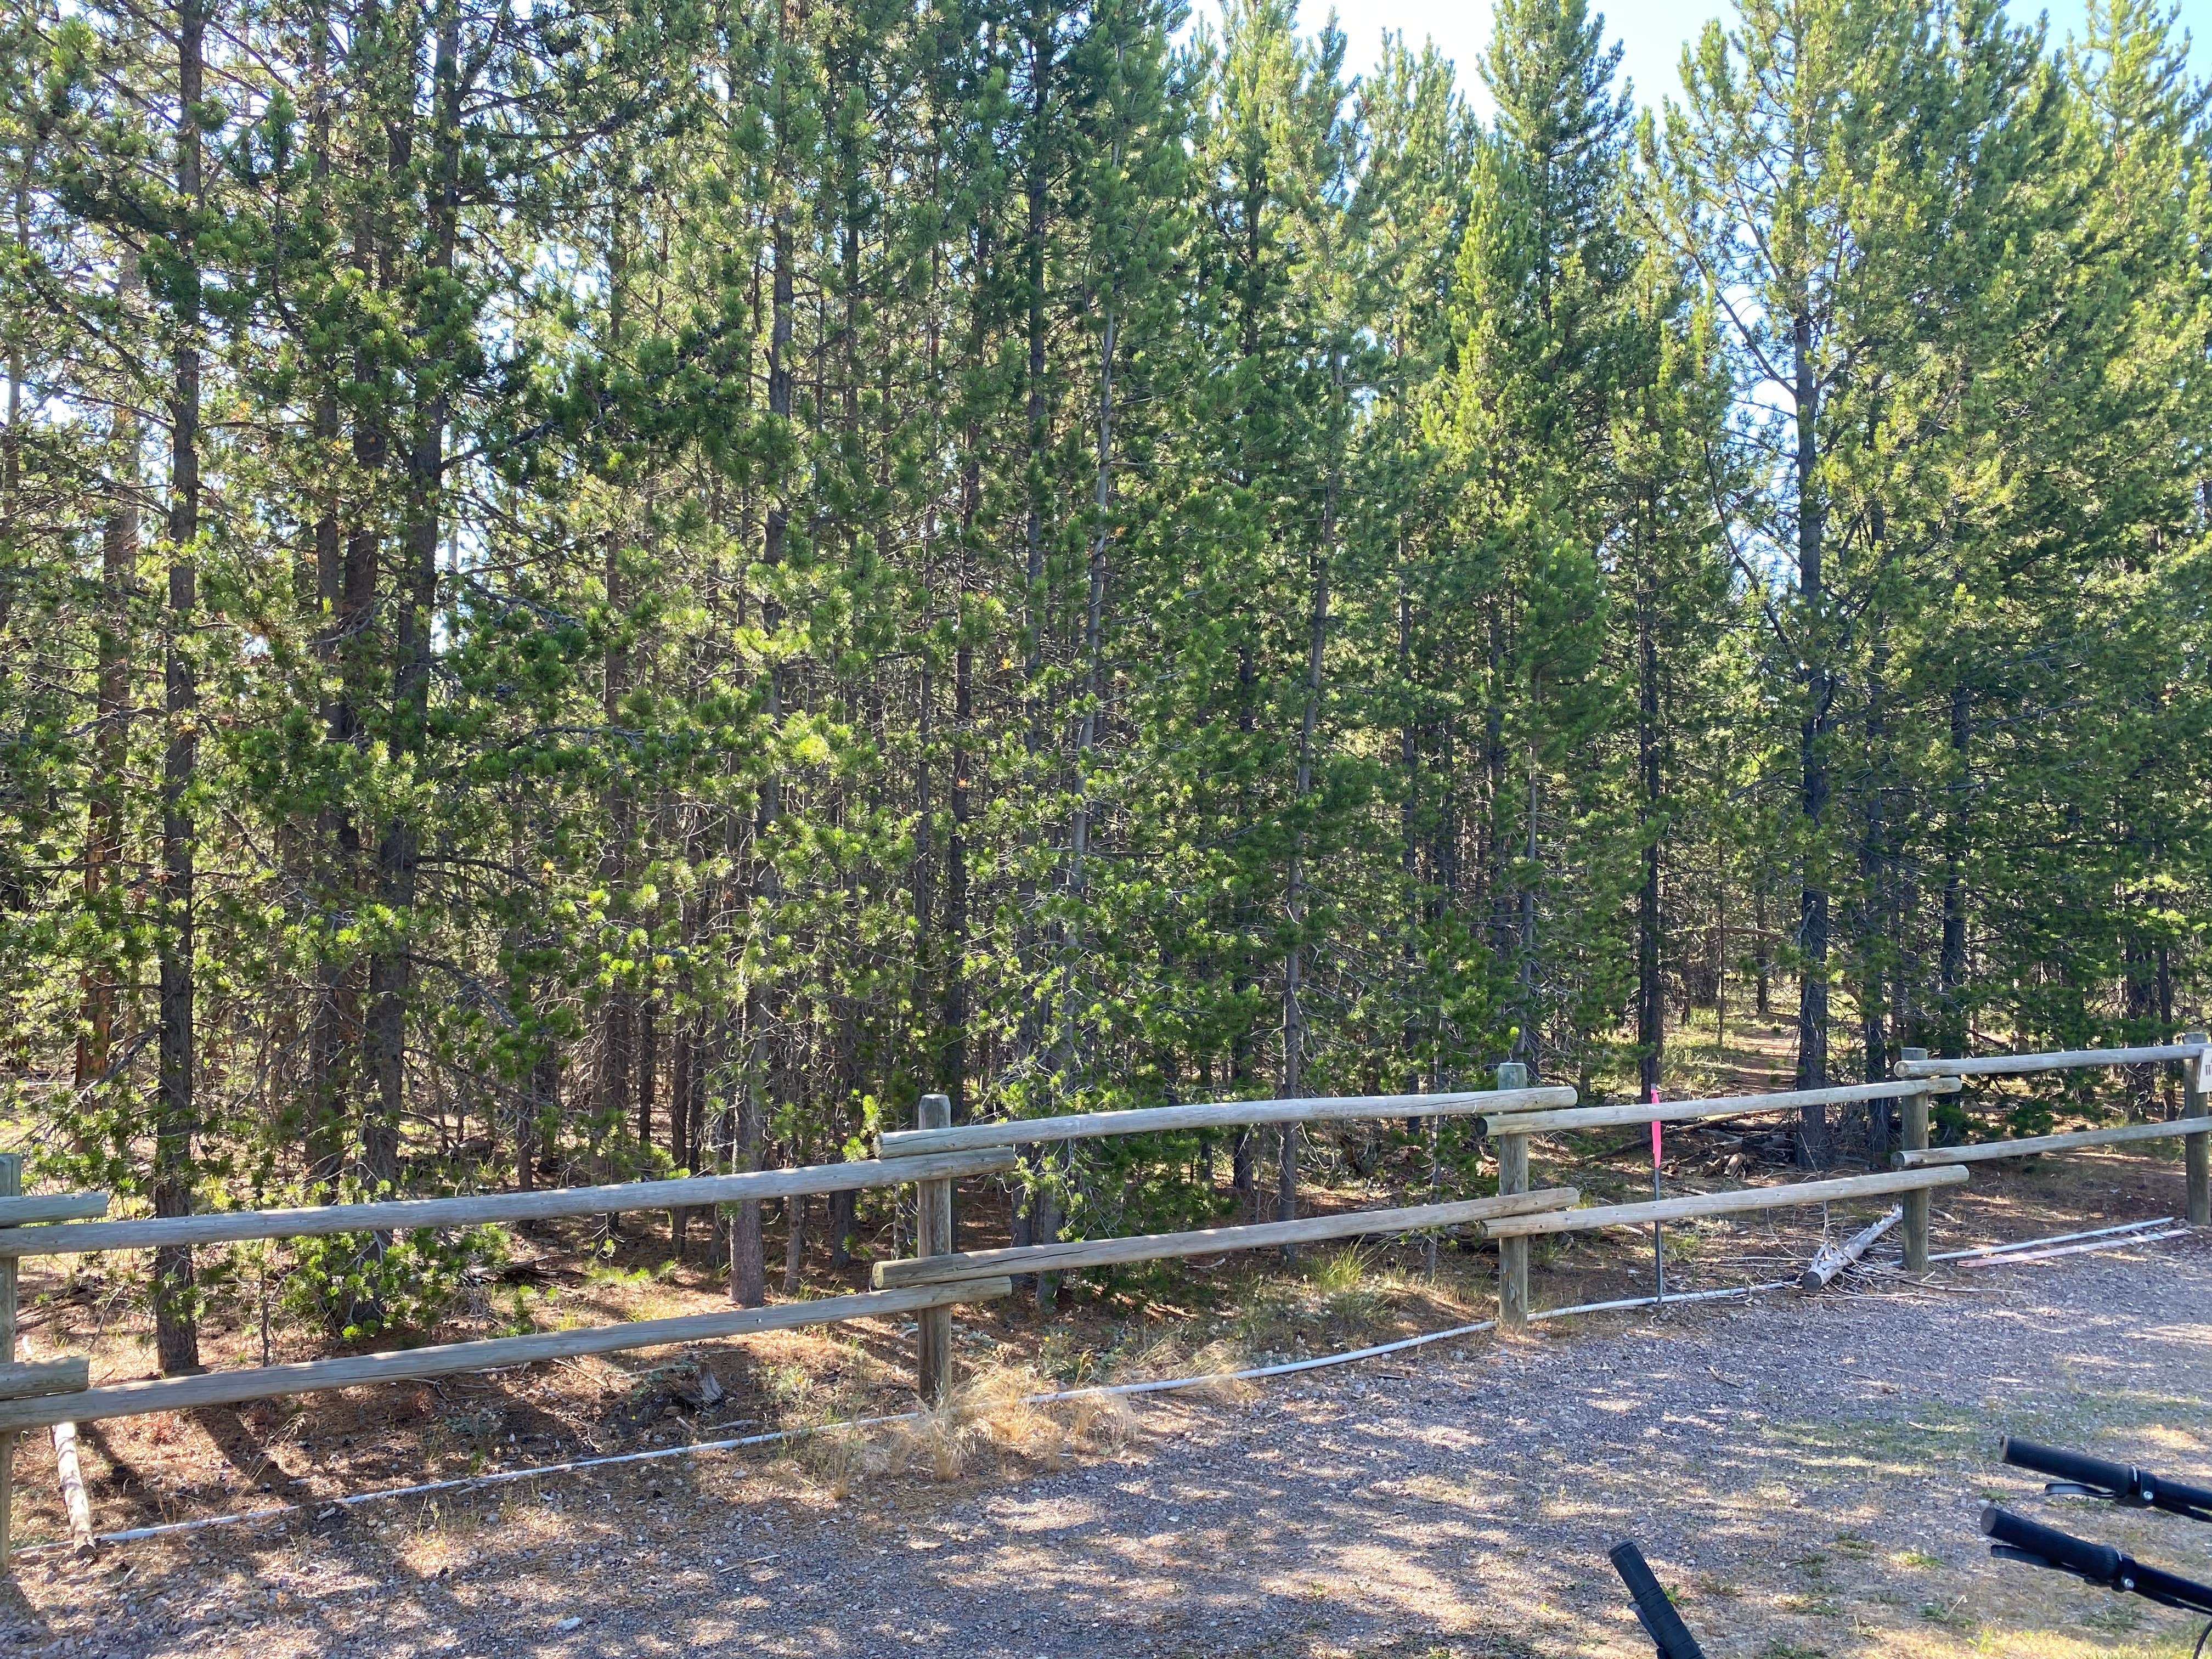 Camper submitted image from Yellowstone Grizzly RV Park and Resort - 5